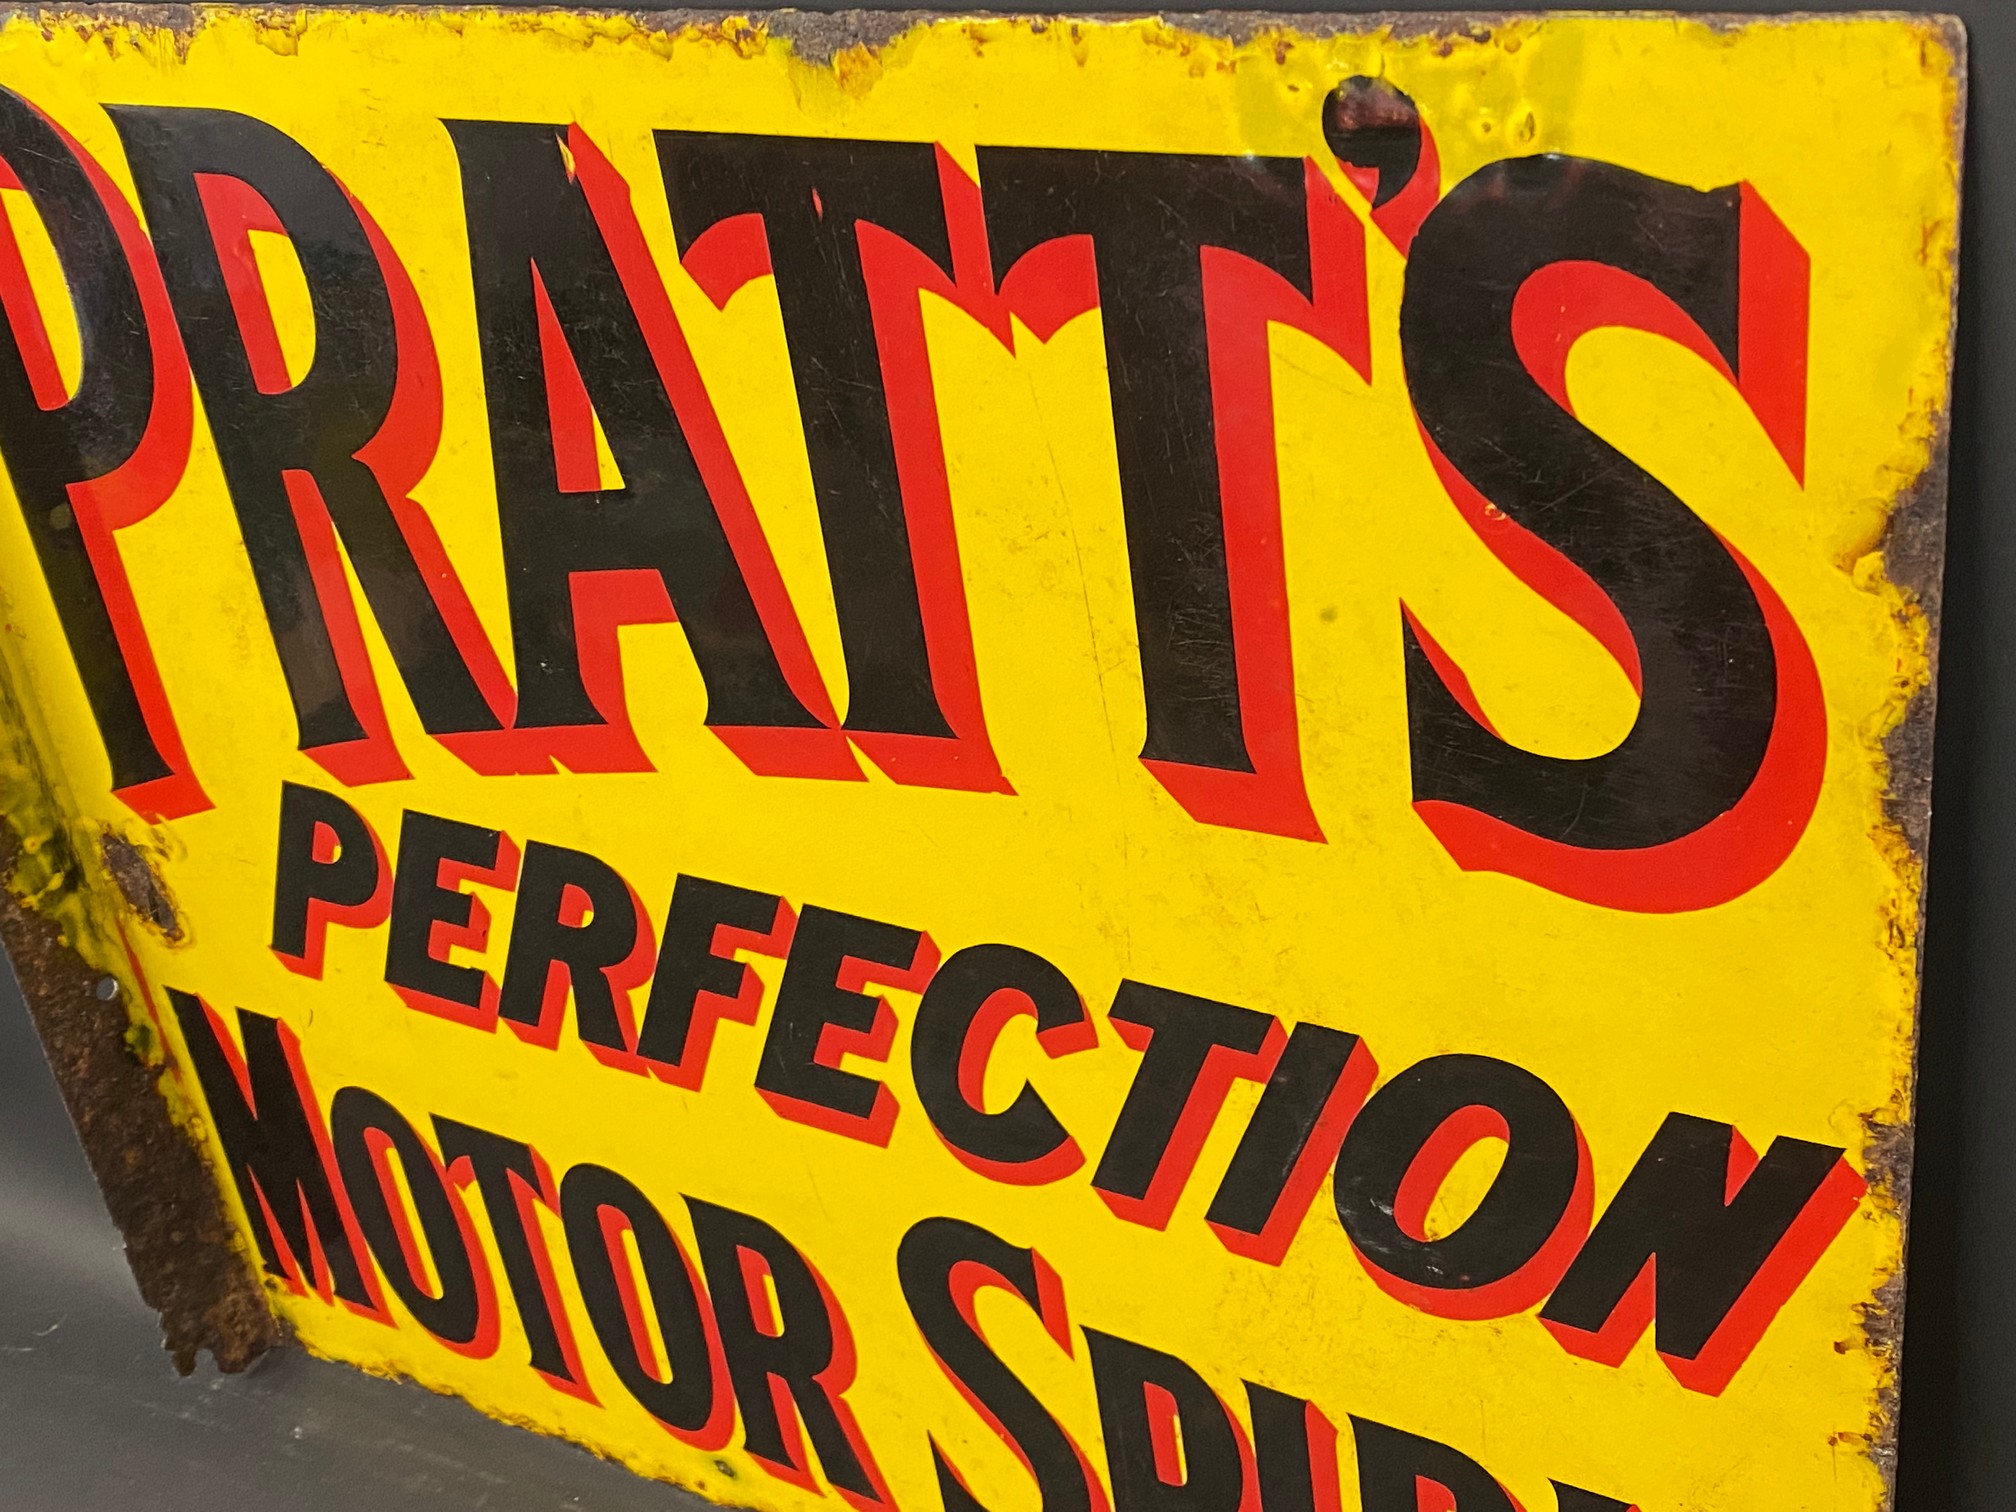 A Pratt's Perfection Motor Spirit double sided enamel sign by Bruton, 21 x 18". - Image 2 of 5